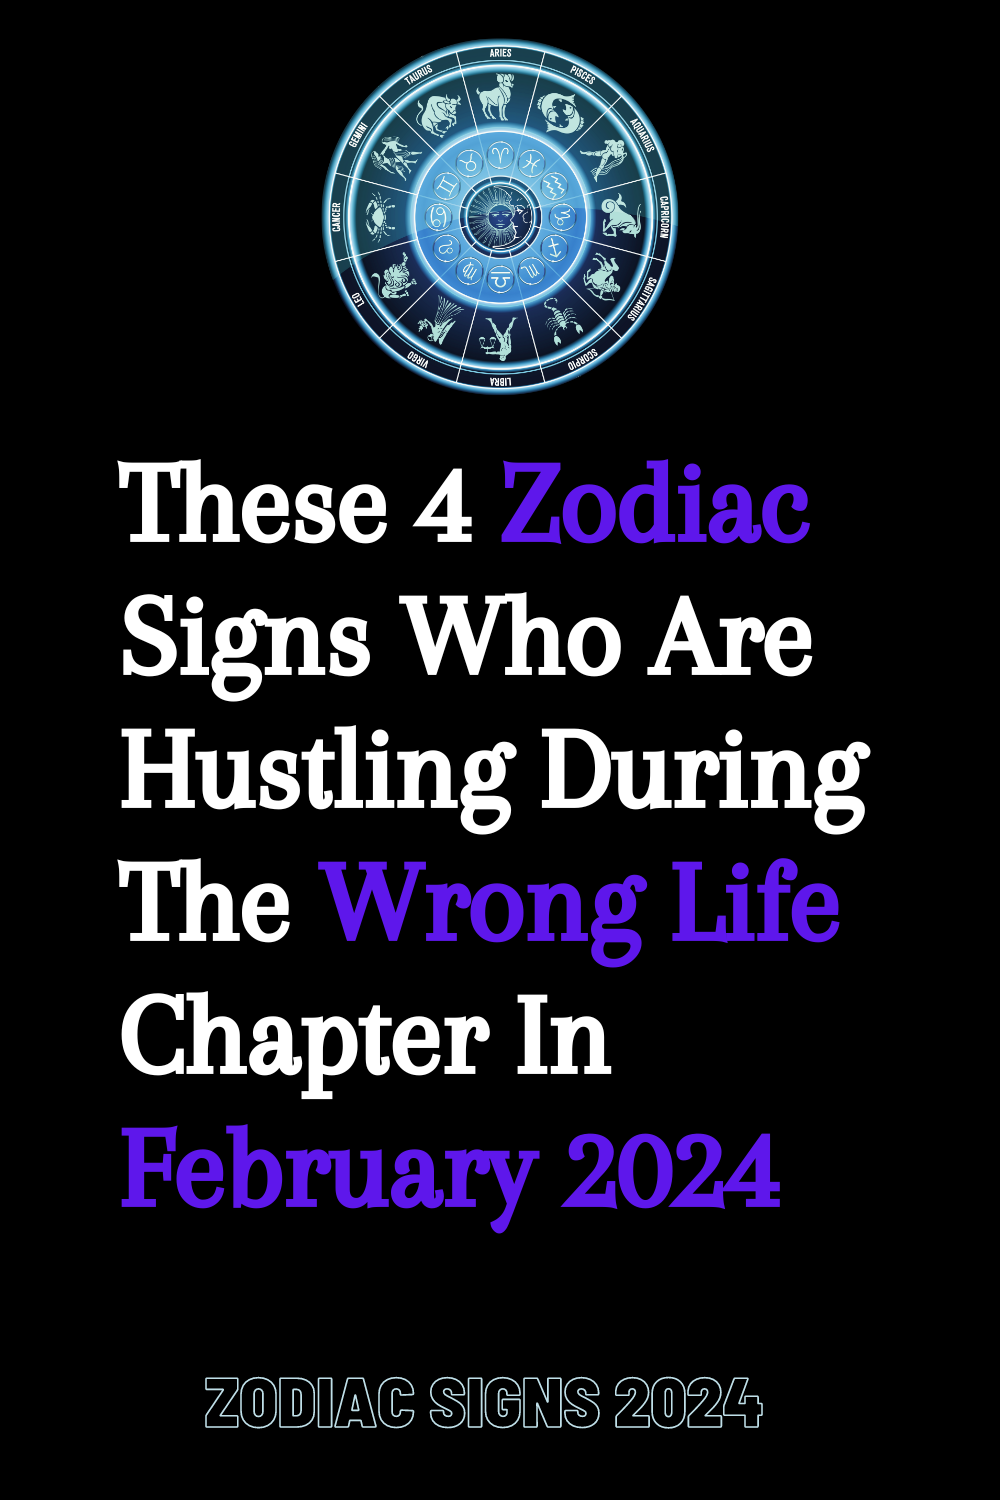 These 4 Zodiac Signs Who Are Hustling During The Wrong Life Chapter In February 2024